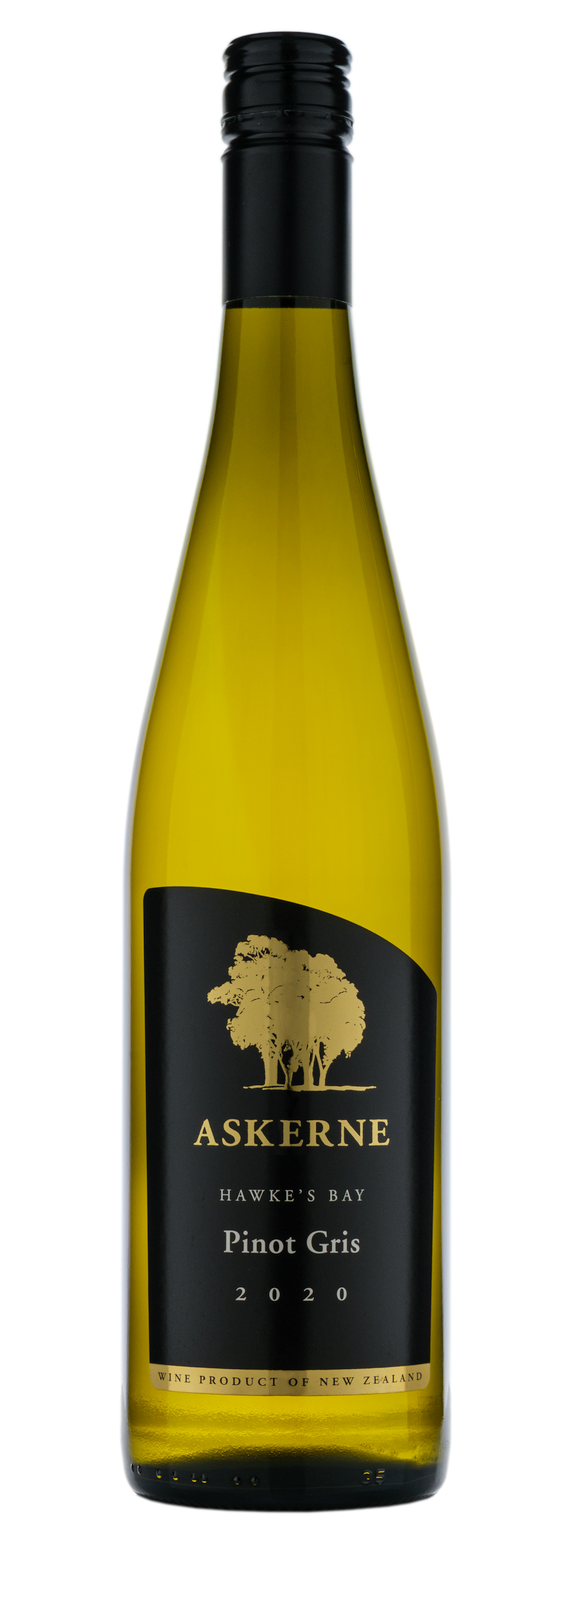 Askerne Pinot Gris 2020 - Wines of NZ